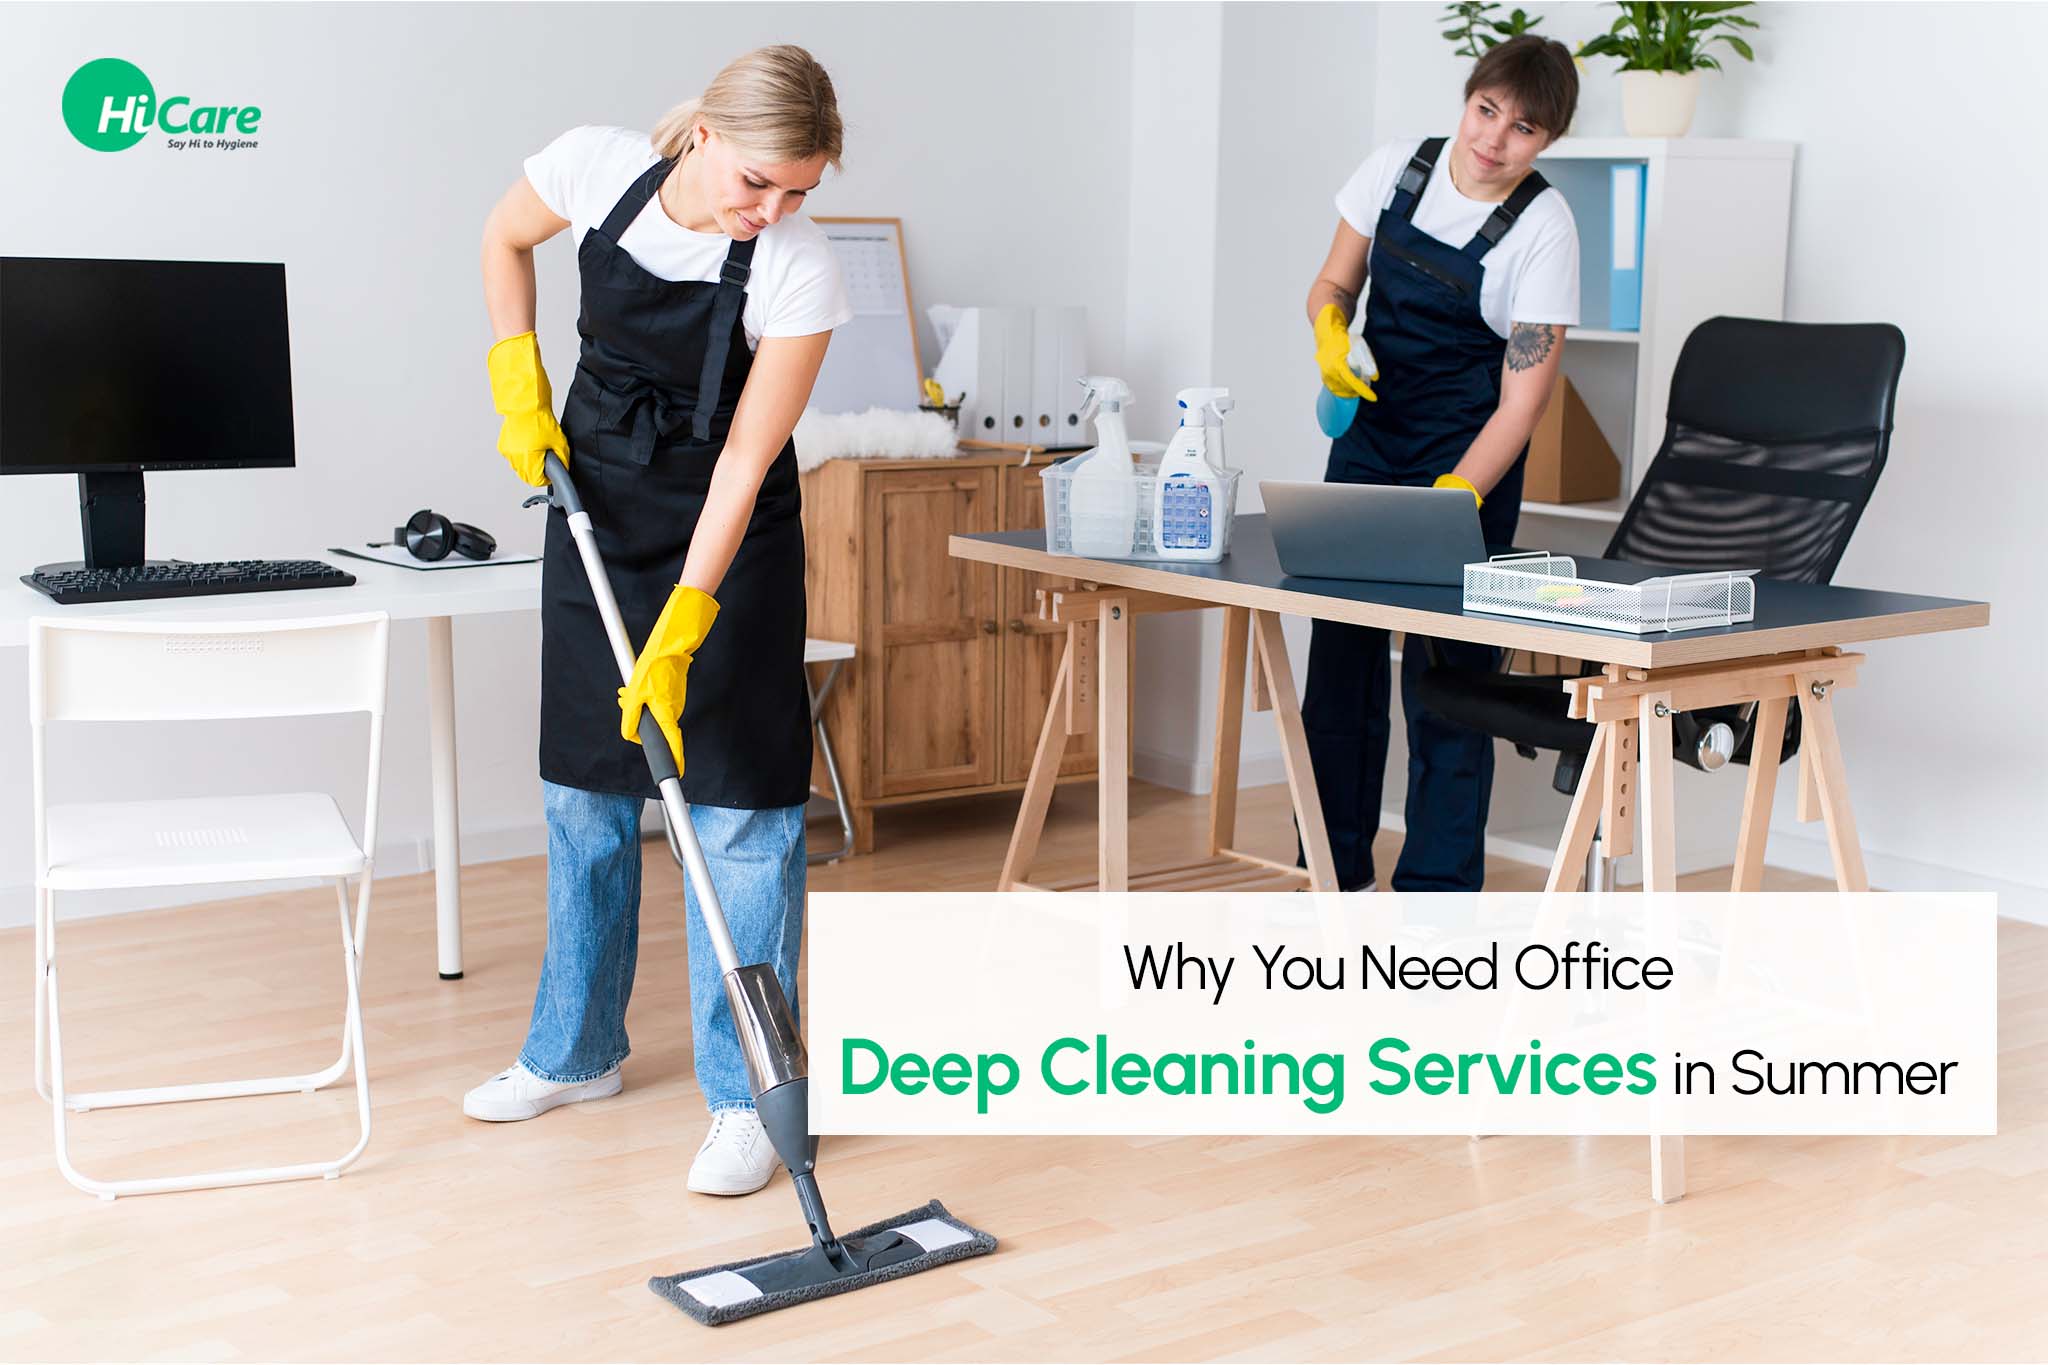 Why You Need Office Deep Cleaning Services in Summer